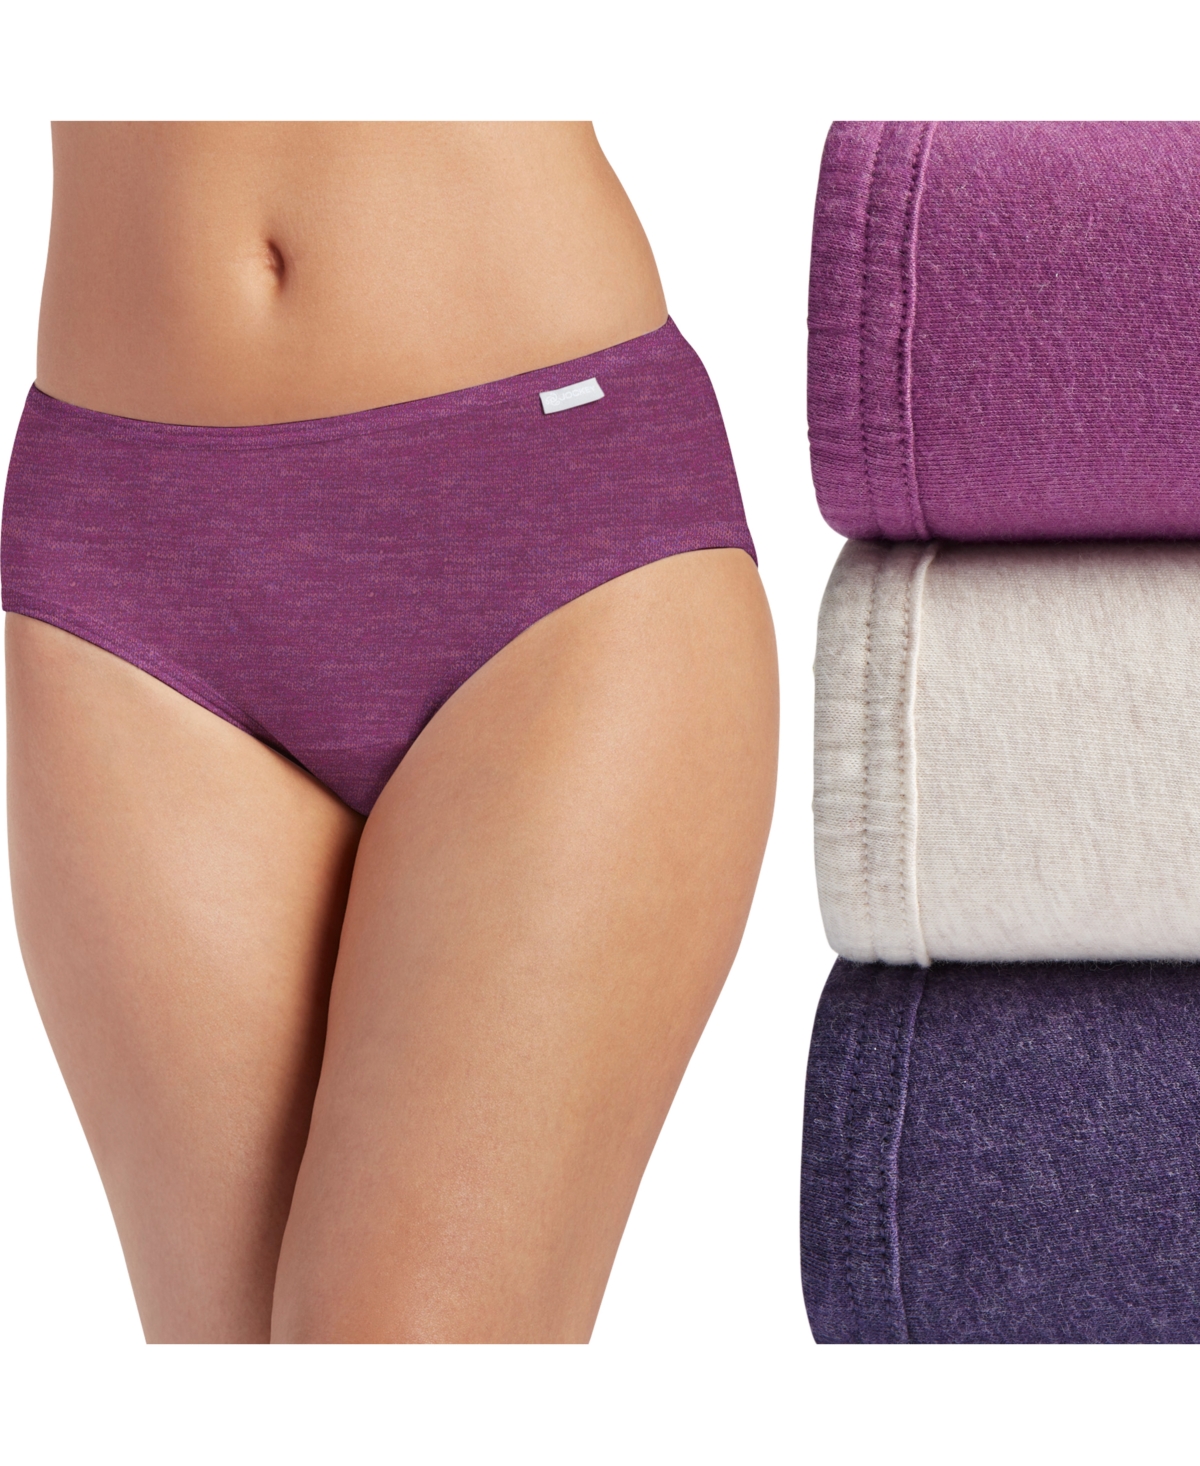 Elance Hipster Underwear 3 Pack 1482 1488, also available in Plus sizes - Oatmeal Heather/Boysenberry Heather/Perf